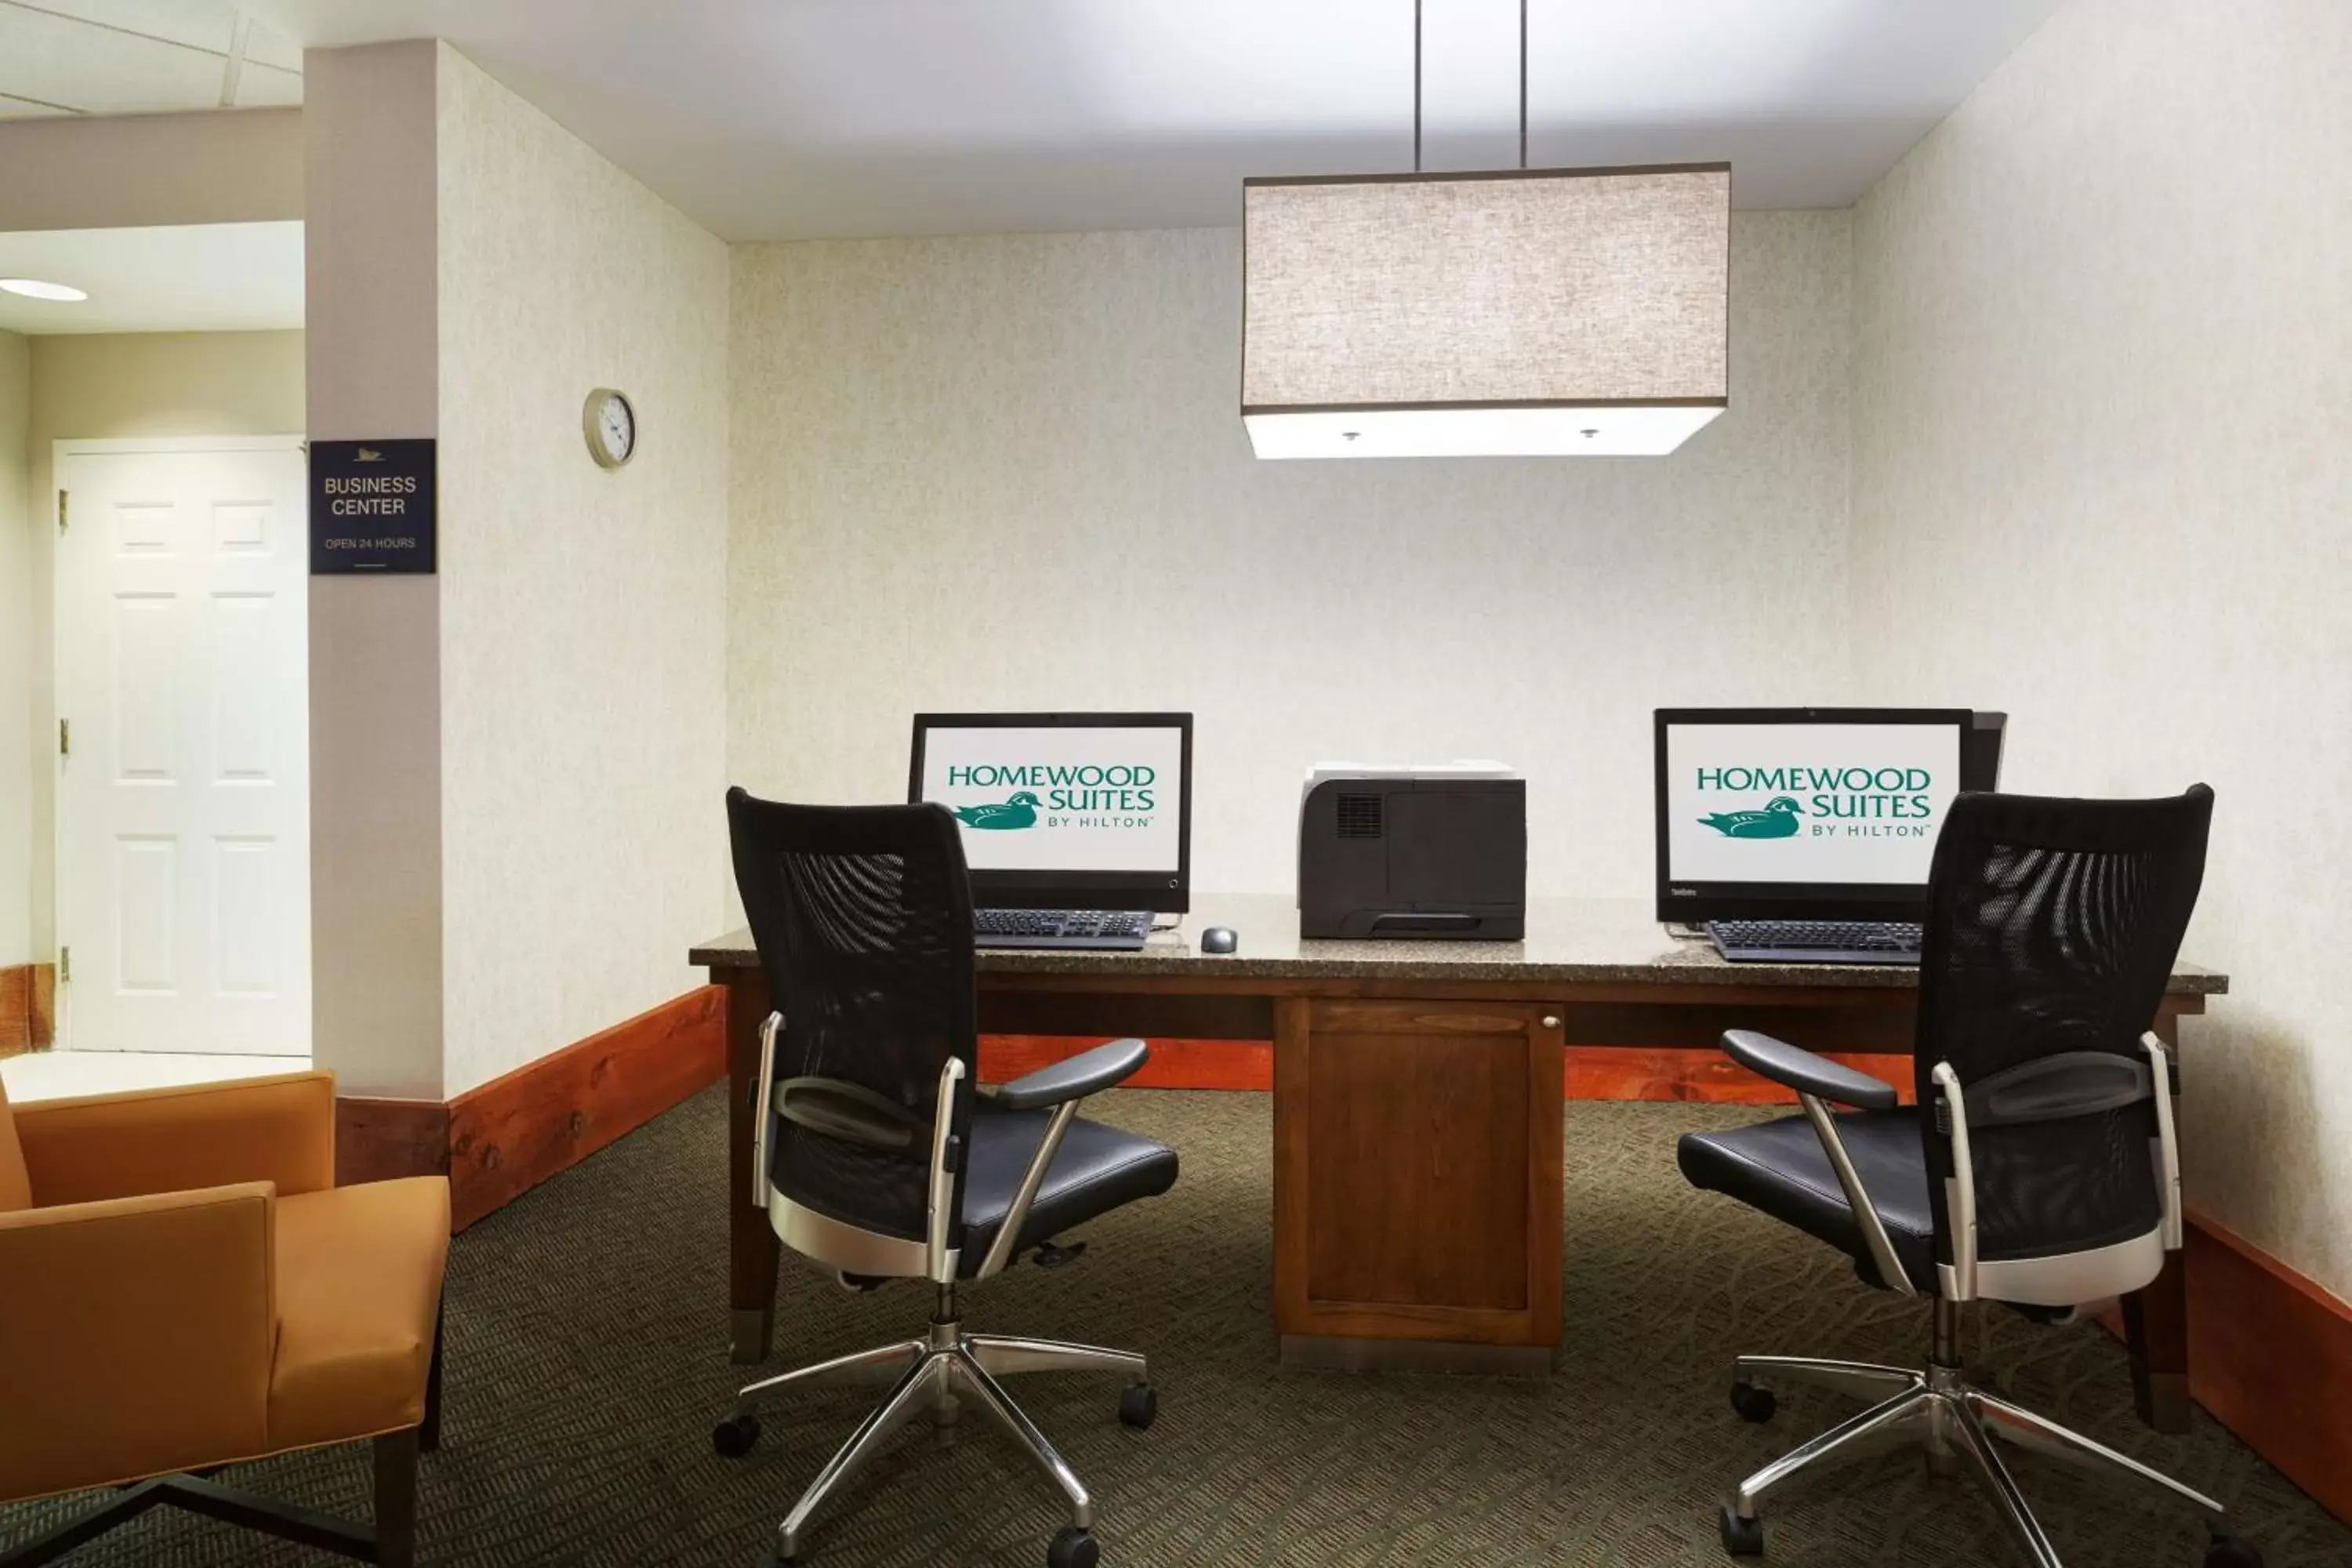 Business facilities in Homewood Suites by Hilton Raleigh/Crabtree Valley